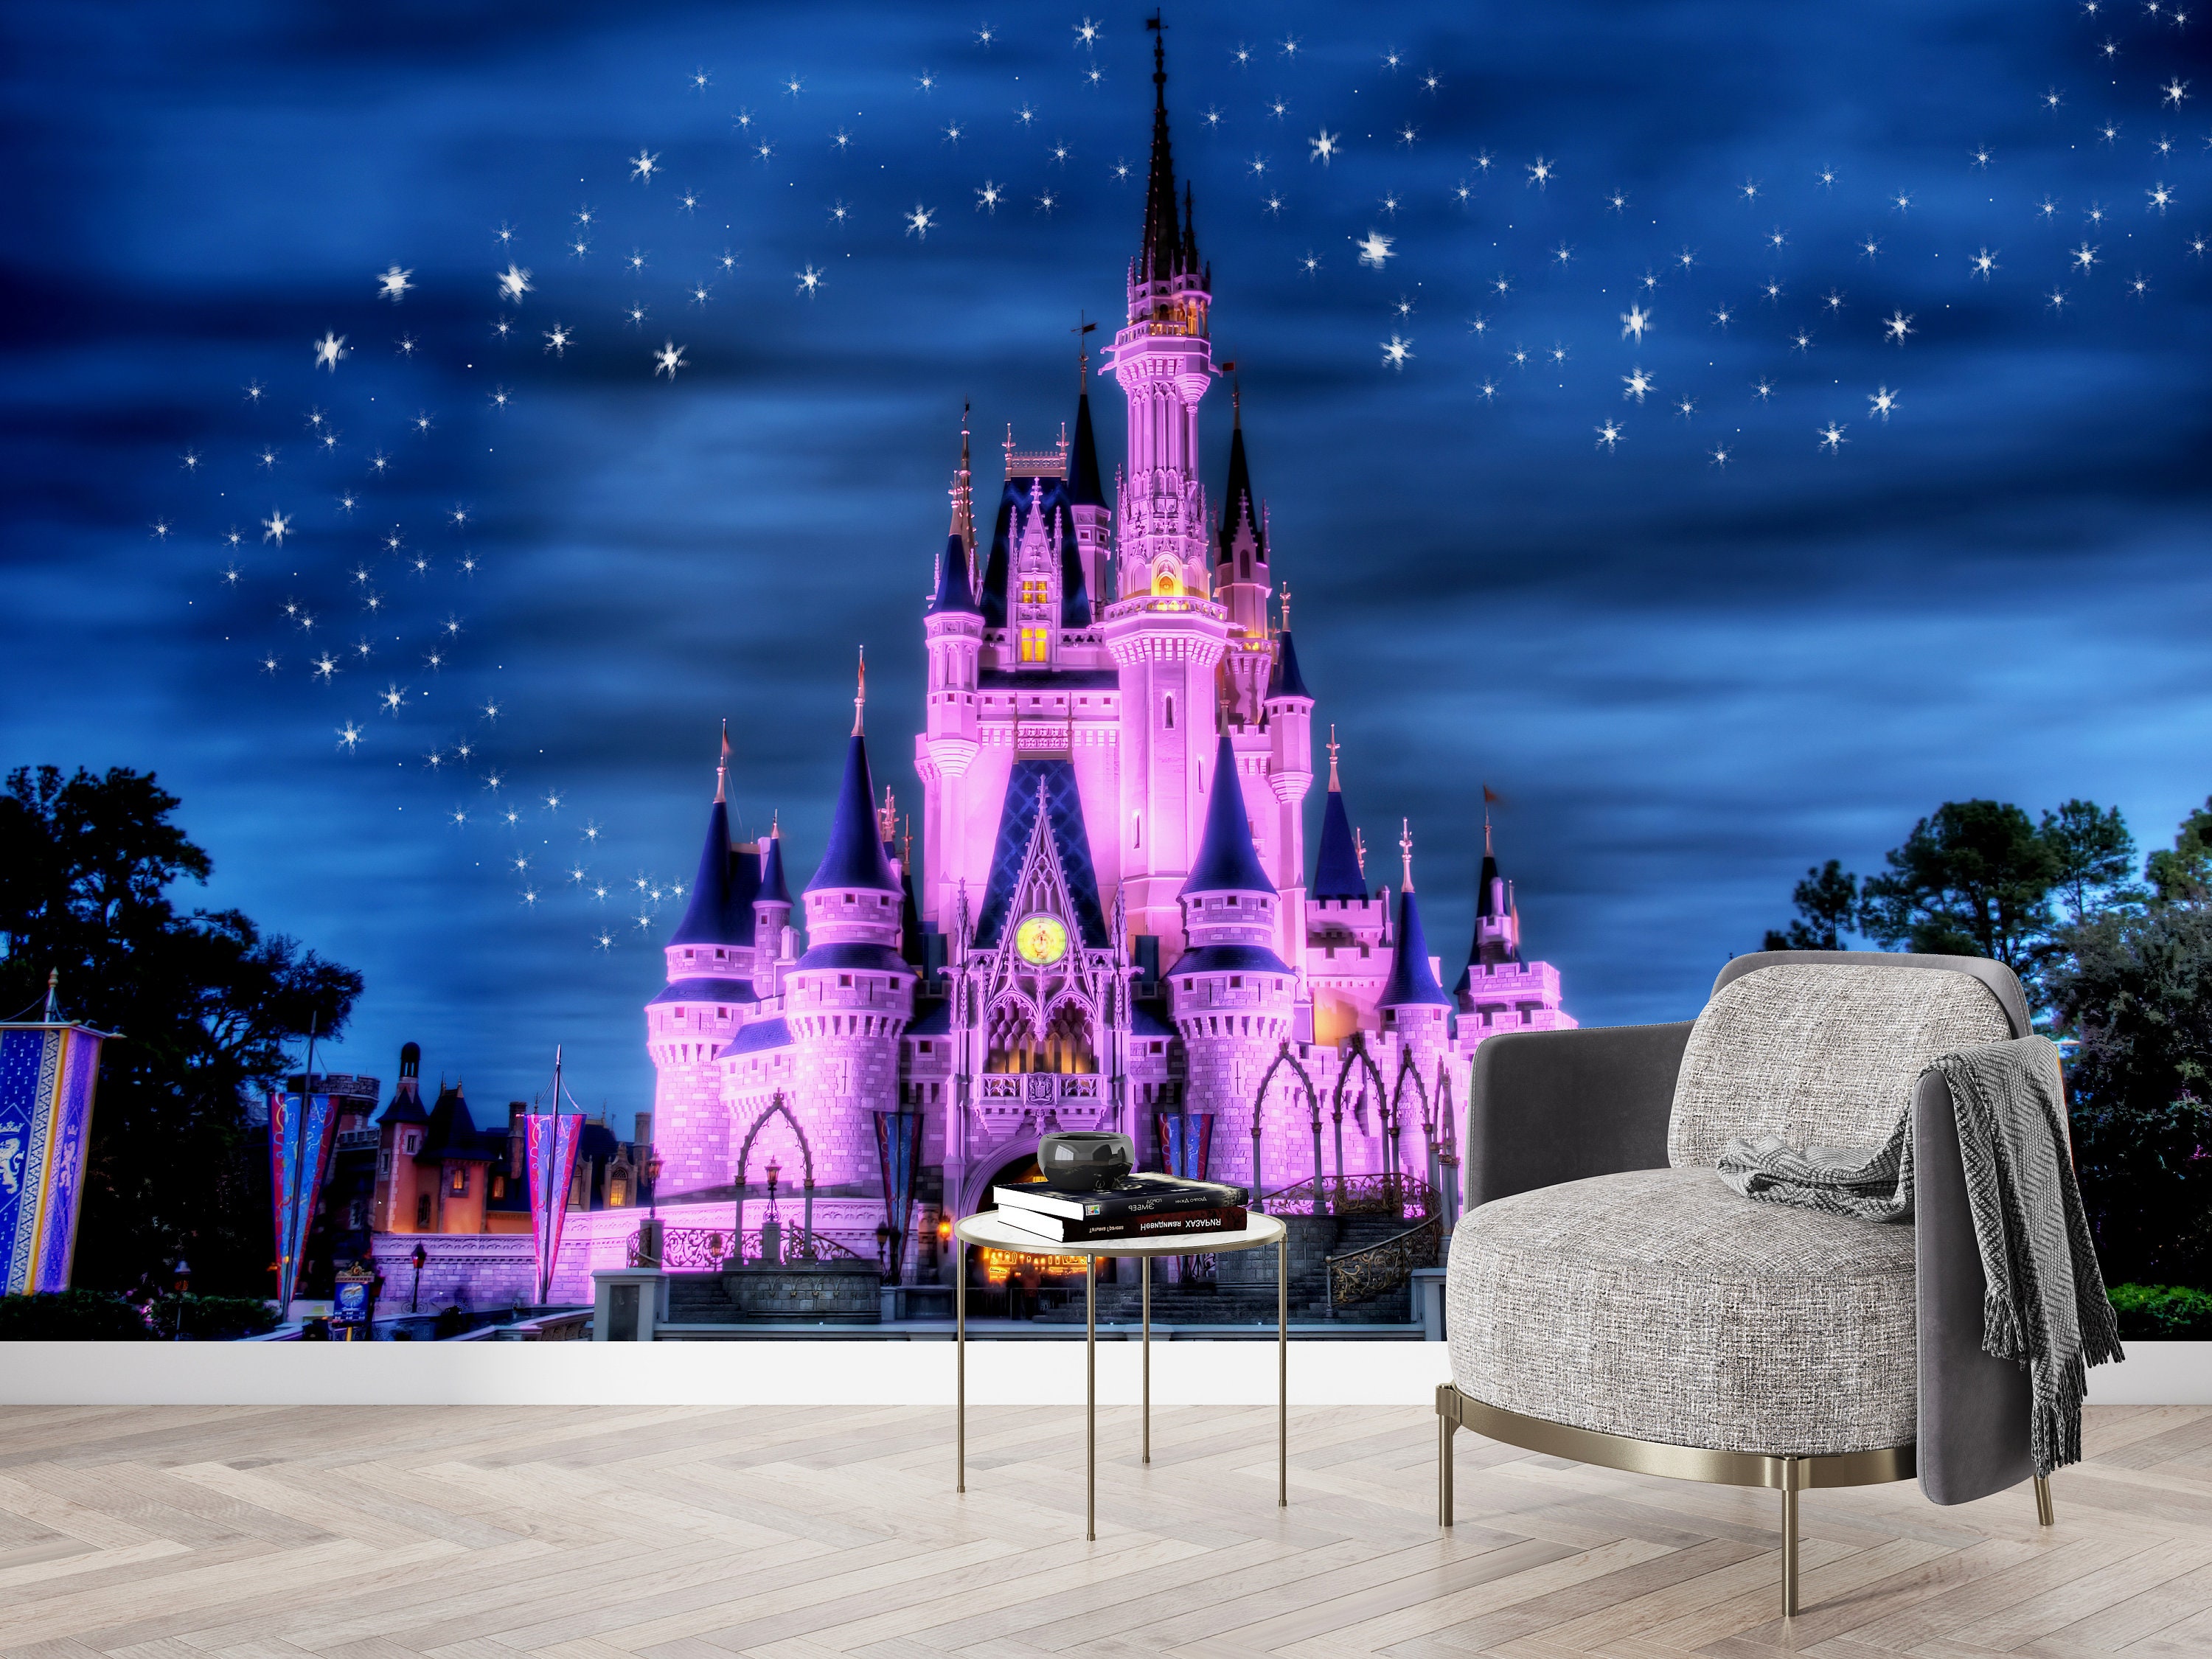 Disney Cinderella Castle Canvas Painting Wall Art Disneyland Under The  Starry Night Cartoon Posters And Prints For Home Decor - Painting &  Calligraphy - AliExpress